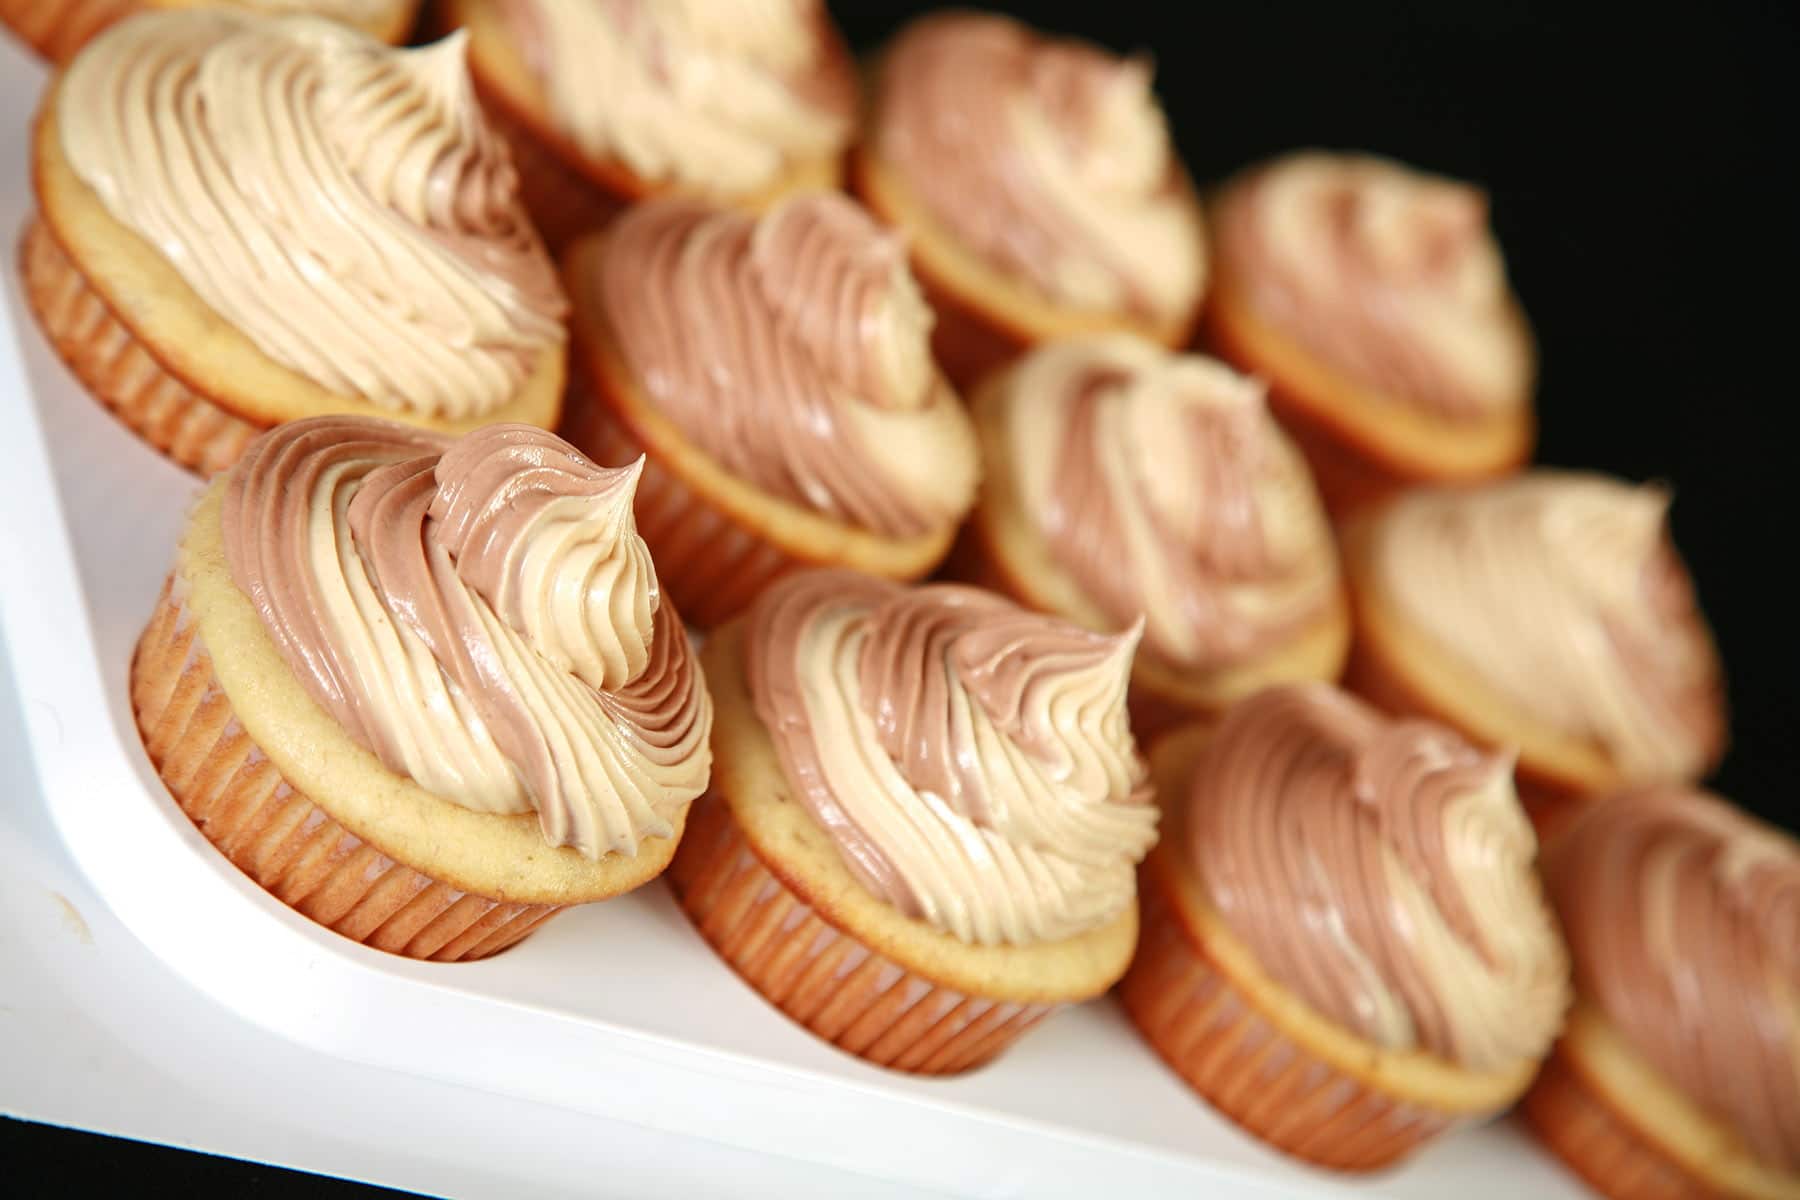 A tray of Fat Elvis Cupcakes - Banana cupcakes frosted with a two-tone swirl of Swiss Meringue buttercream, in both peanut butter and chocolate flavours.